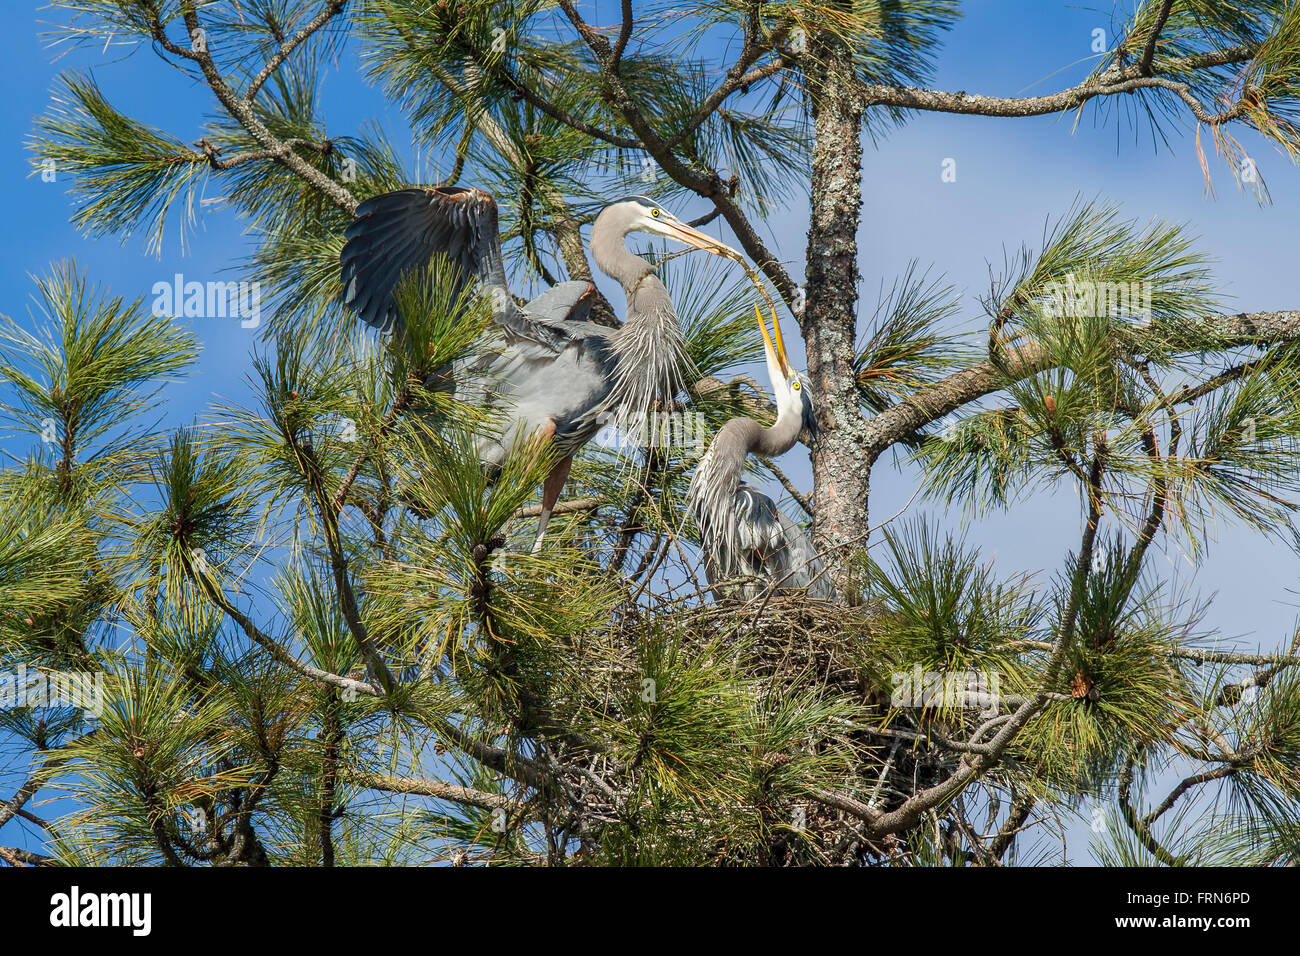 One heron takes the stick from the other. Stock Photo